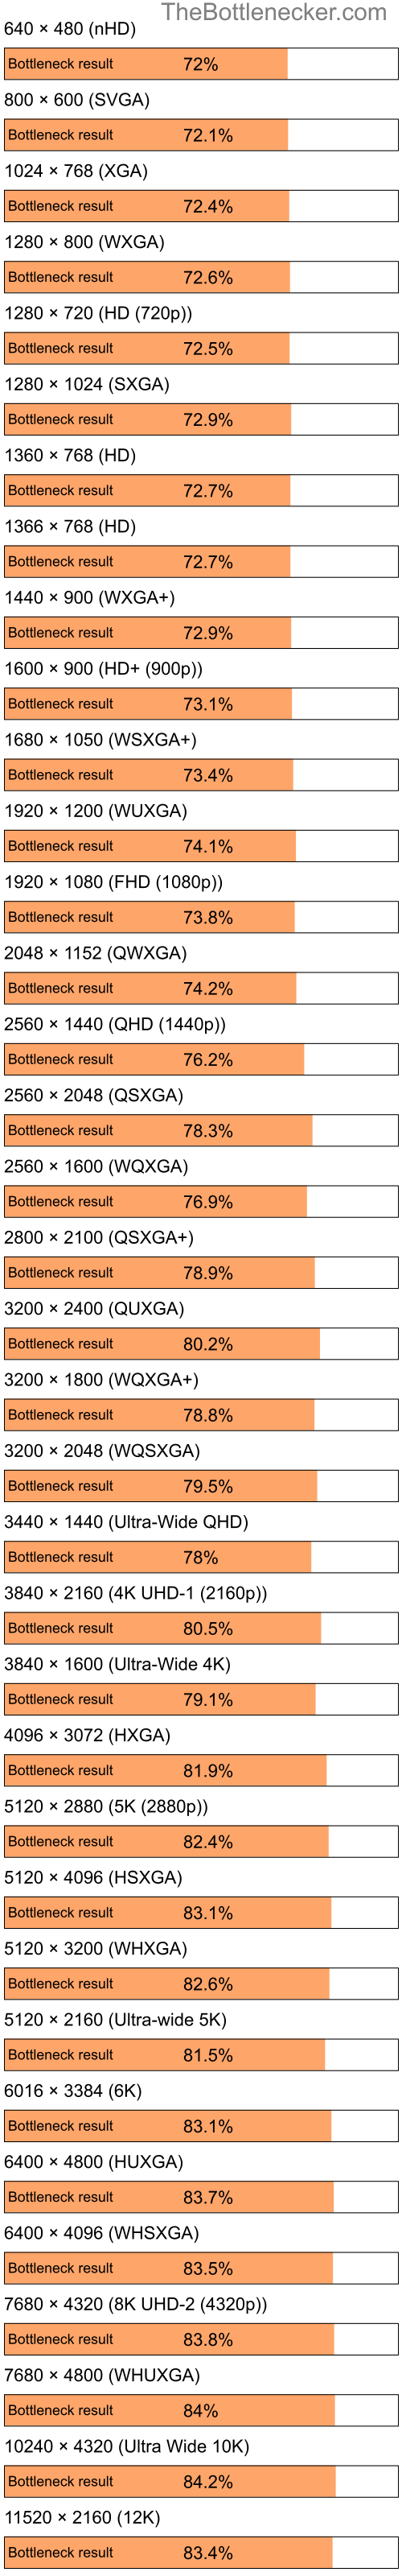 Bottleneck results by resolution for Intel Atom Z520 and AMD Radeon HD 3200 in Graphic Card Intense Tasks